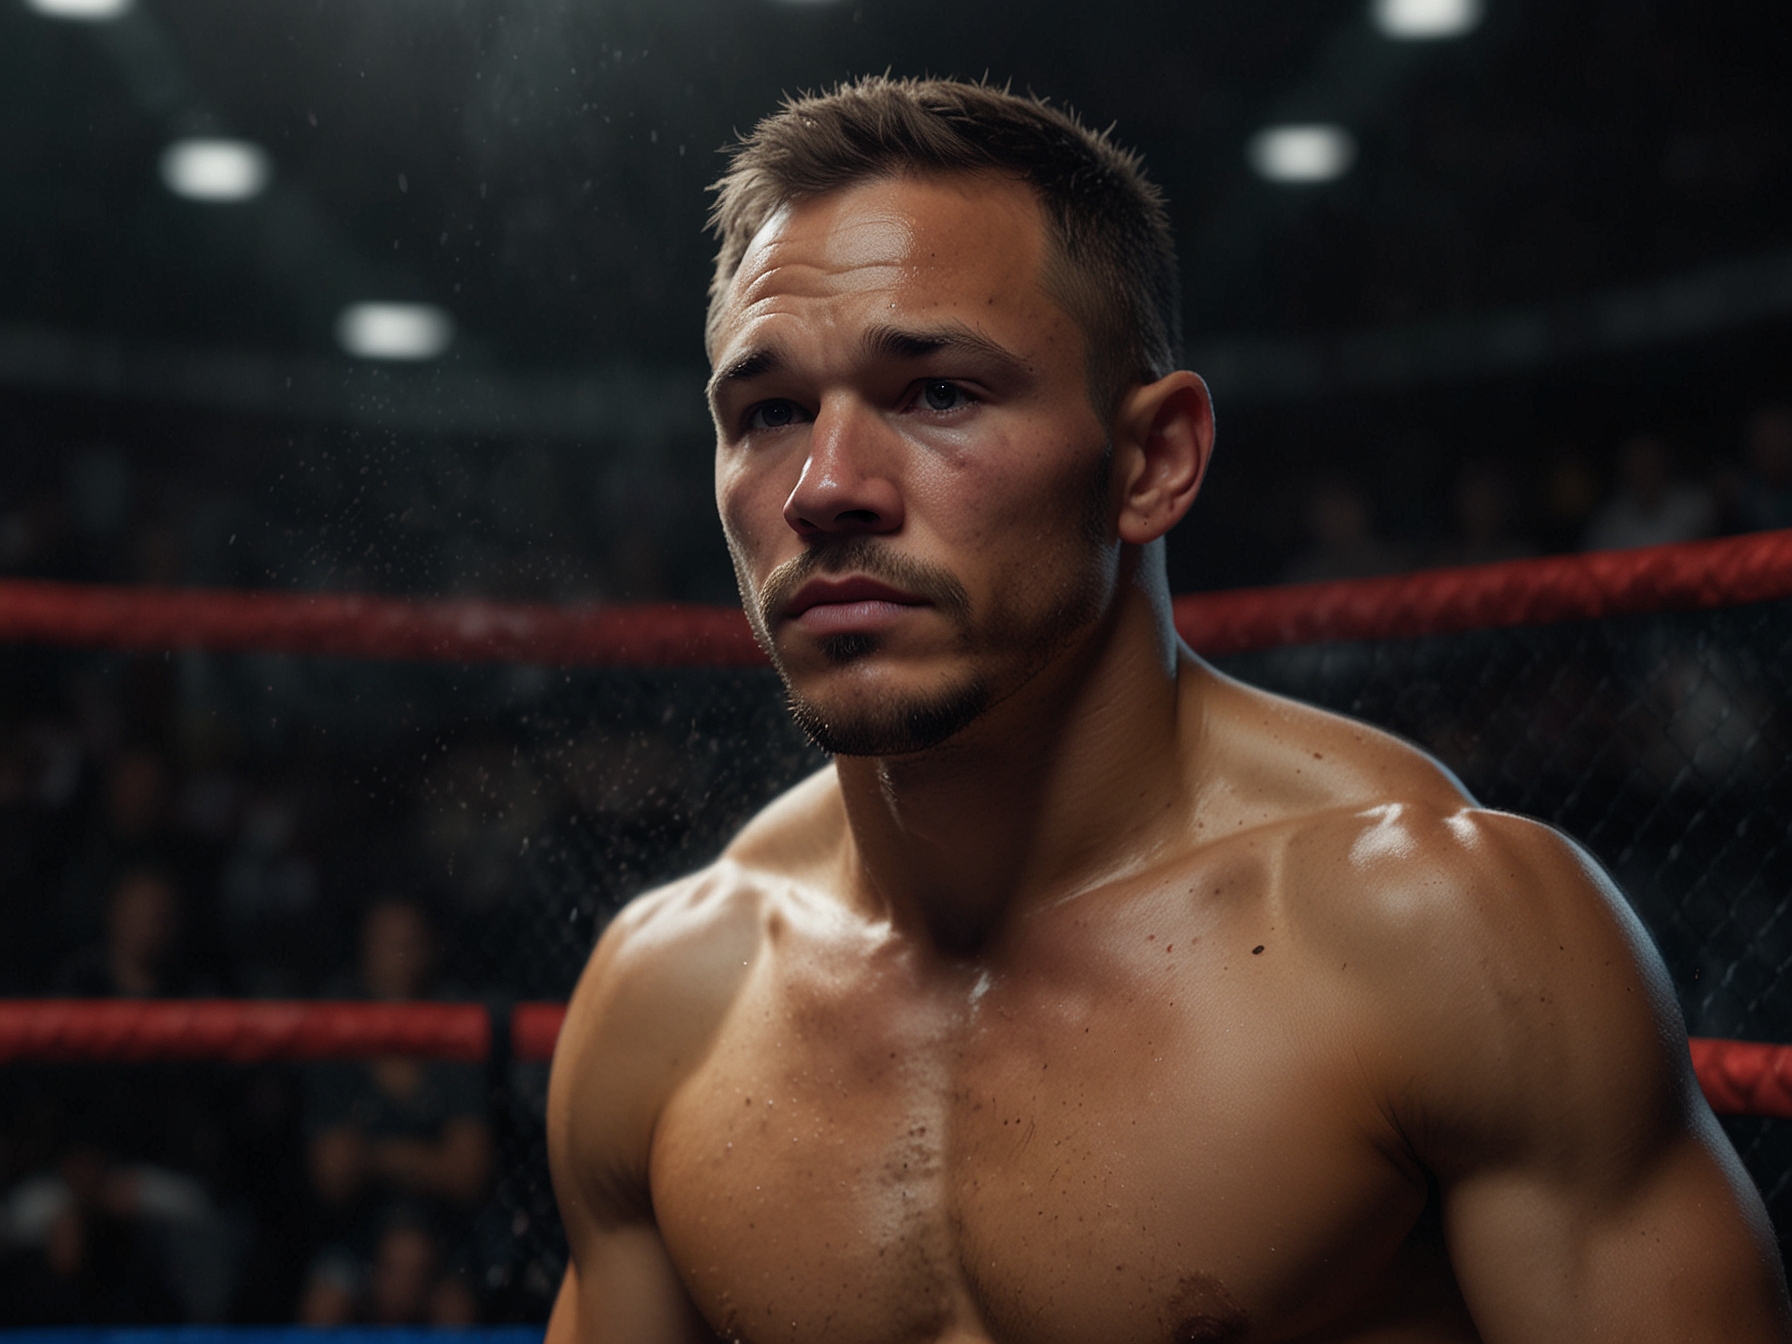 Michael Chandler sits in a dimly lit gym, reflecting on the UFC 303 cancellation. His expression mixes frustration and determination, embodying the emotional journey he shares in the video.